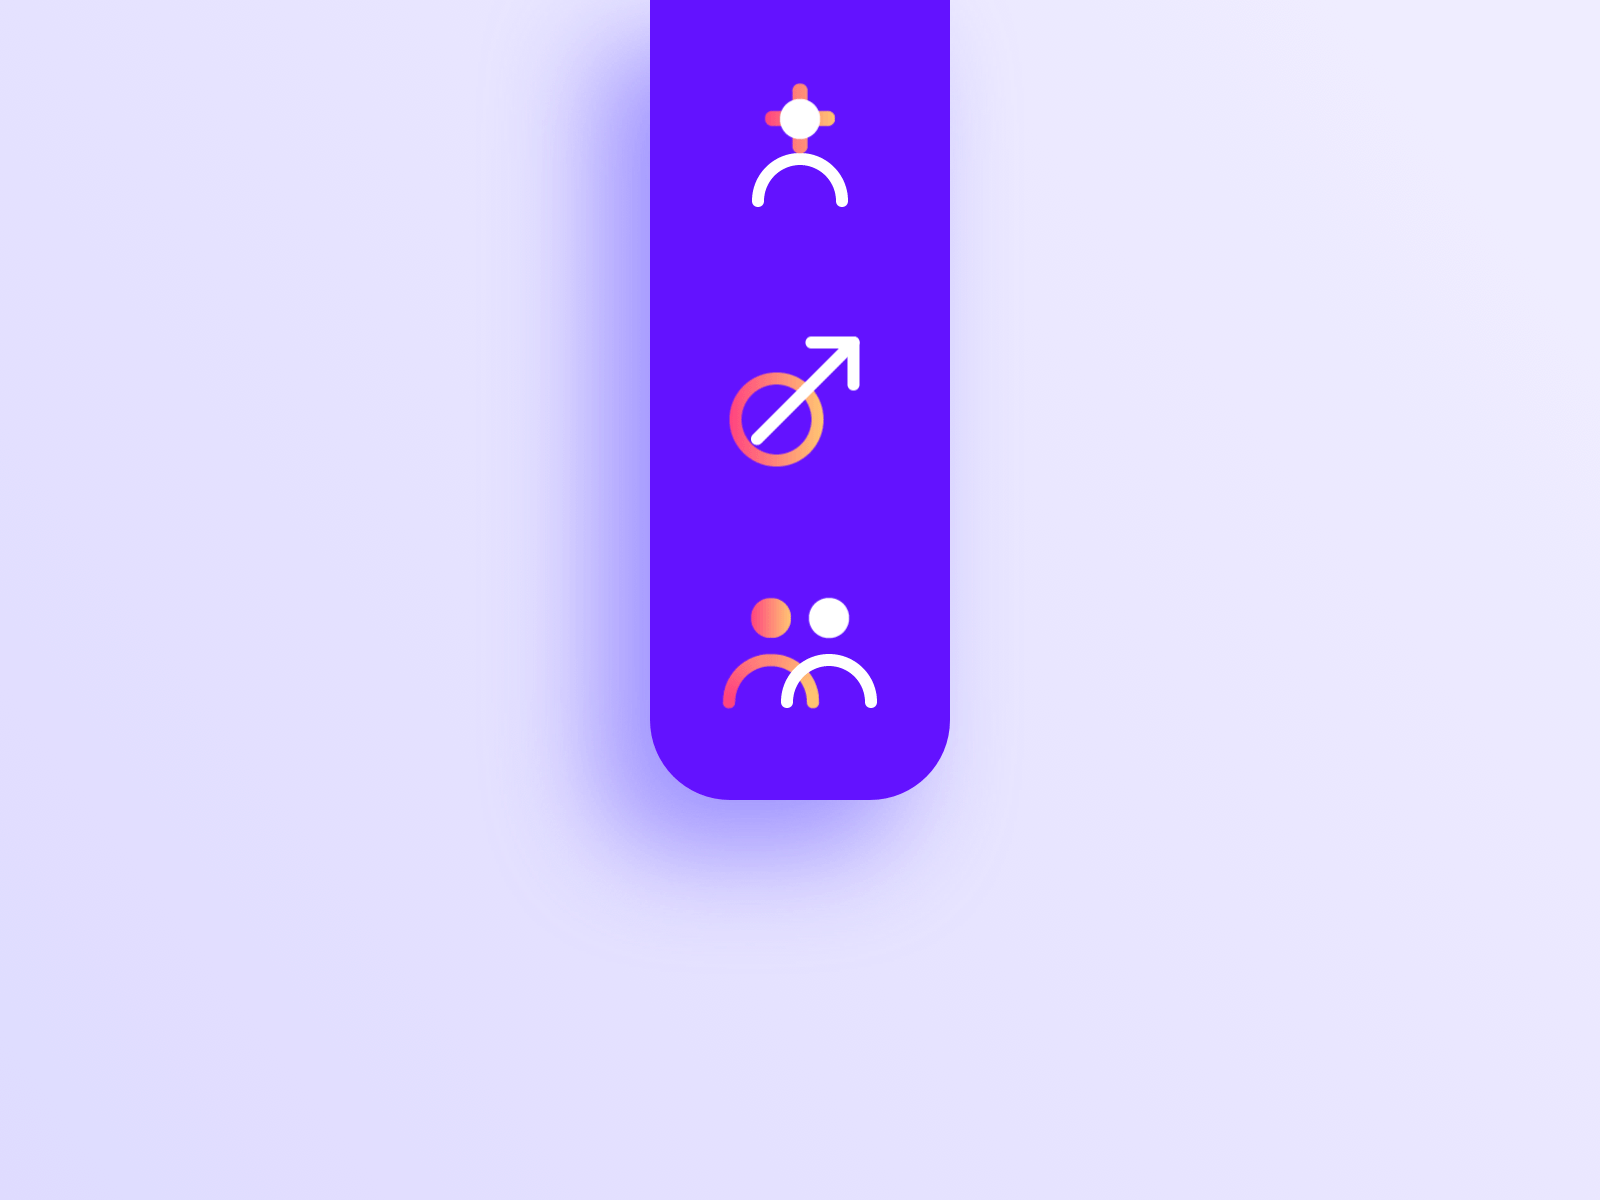 Functional Icon Animation animation branding clean clean interface icons details icon icons local activities mobile app design pictogram pictogram set stroke outline style transition ui user experience user interface ux workflow